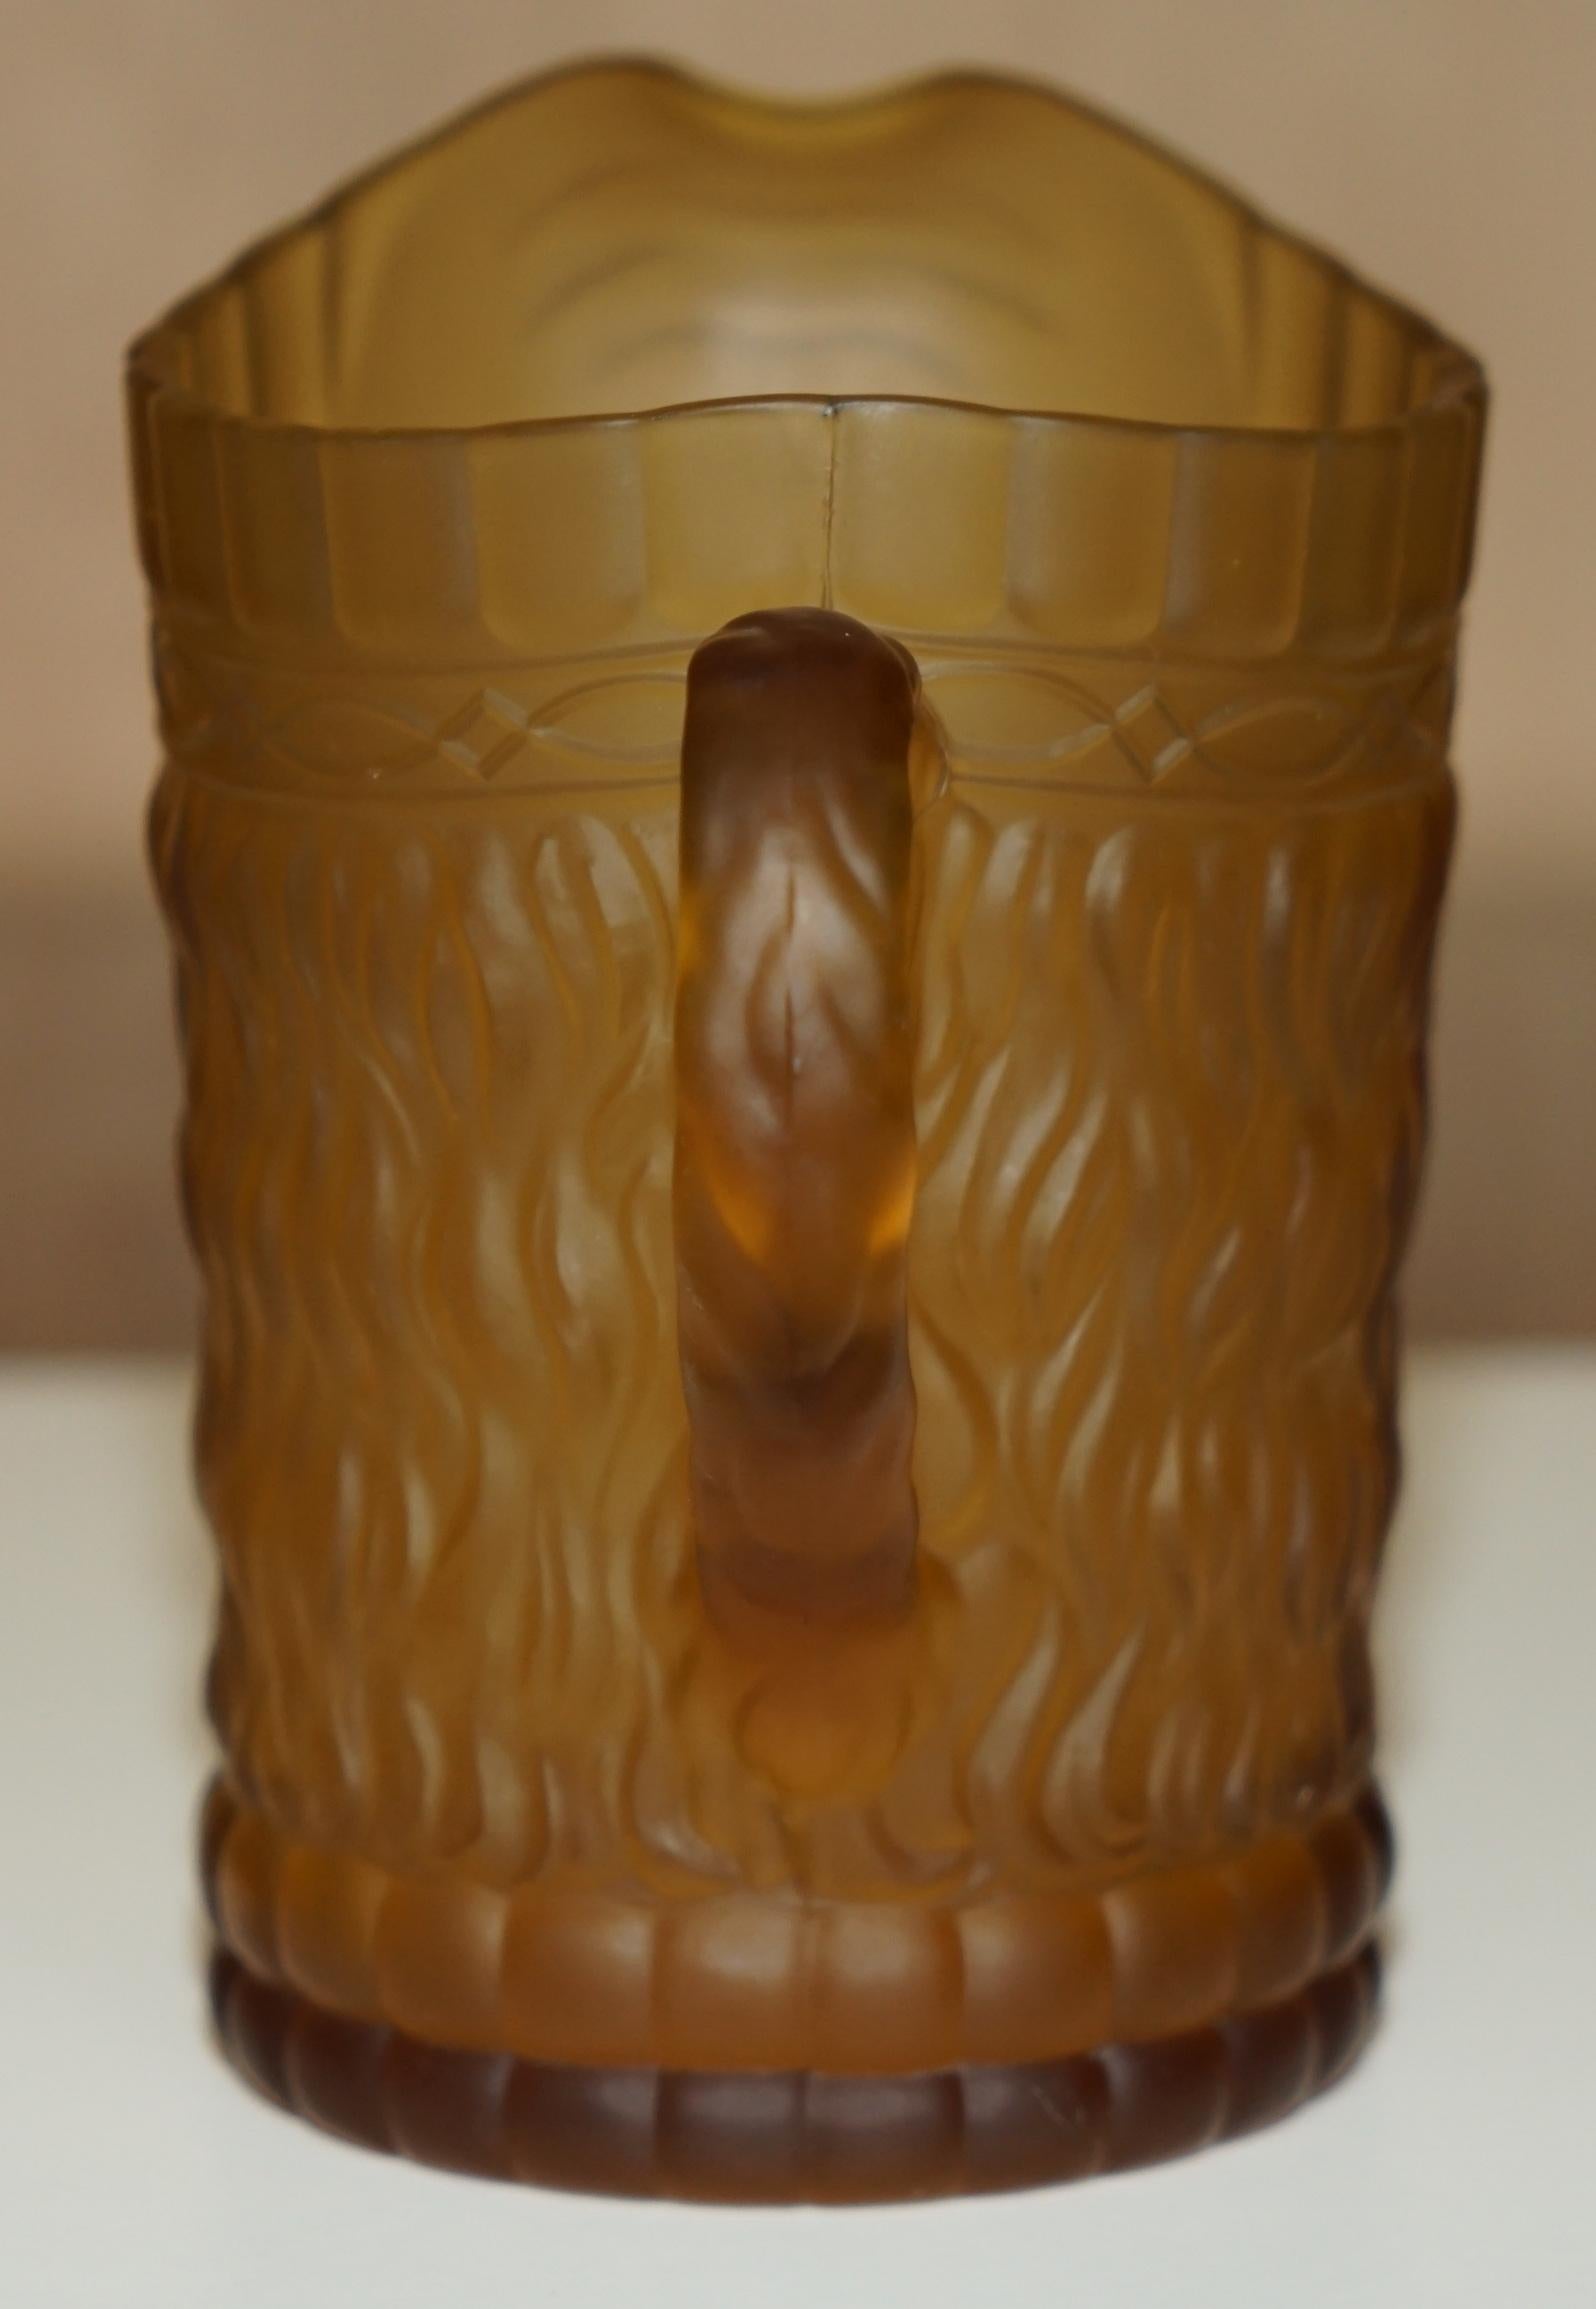 Asian VINTAGE ART DECO CIRCA 1920'S AMBER FACE GLASS CUP SET WITH LARGE PiTCHER JUG For Sale